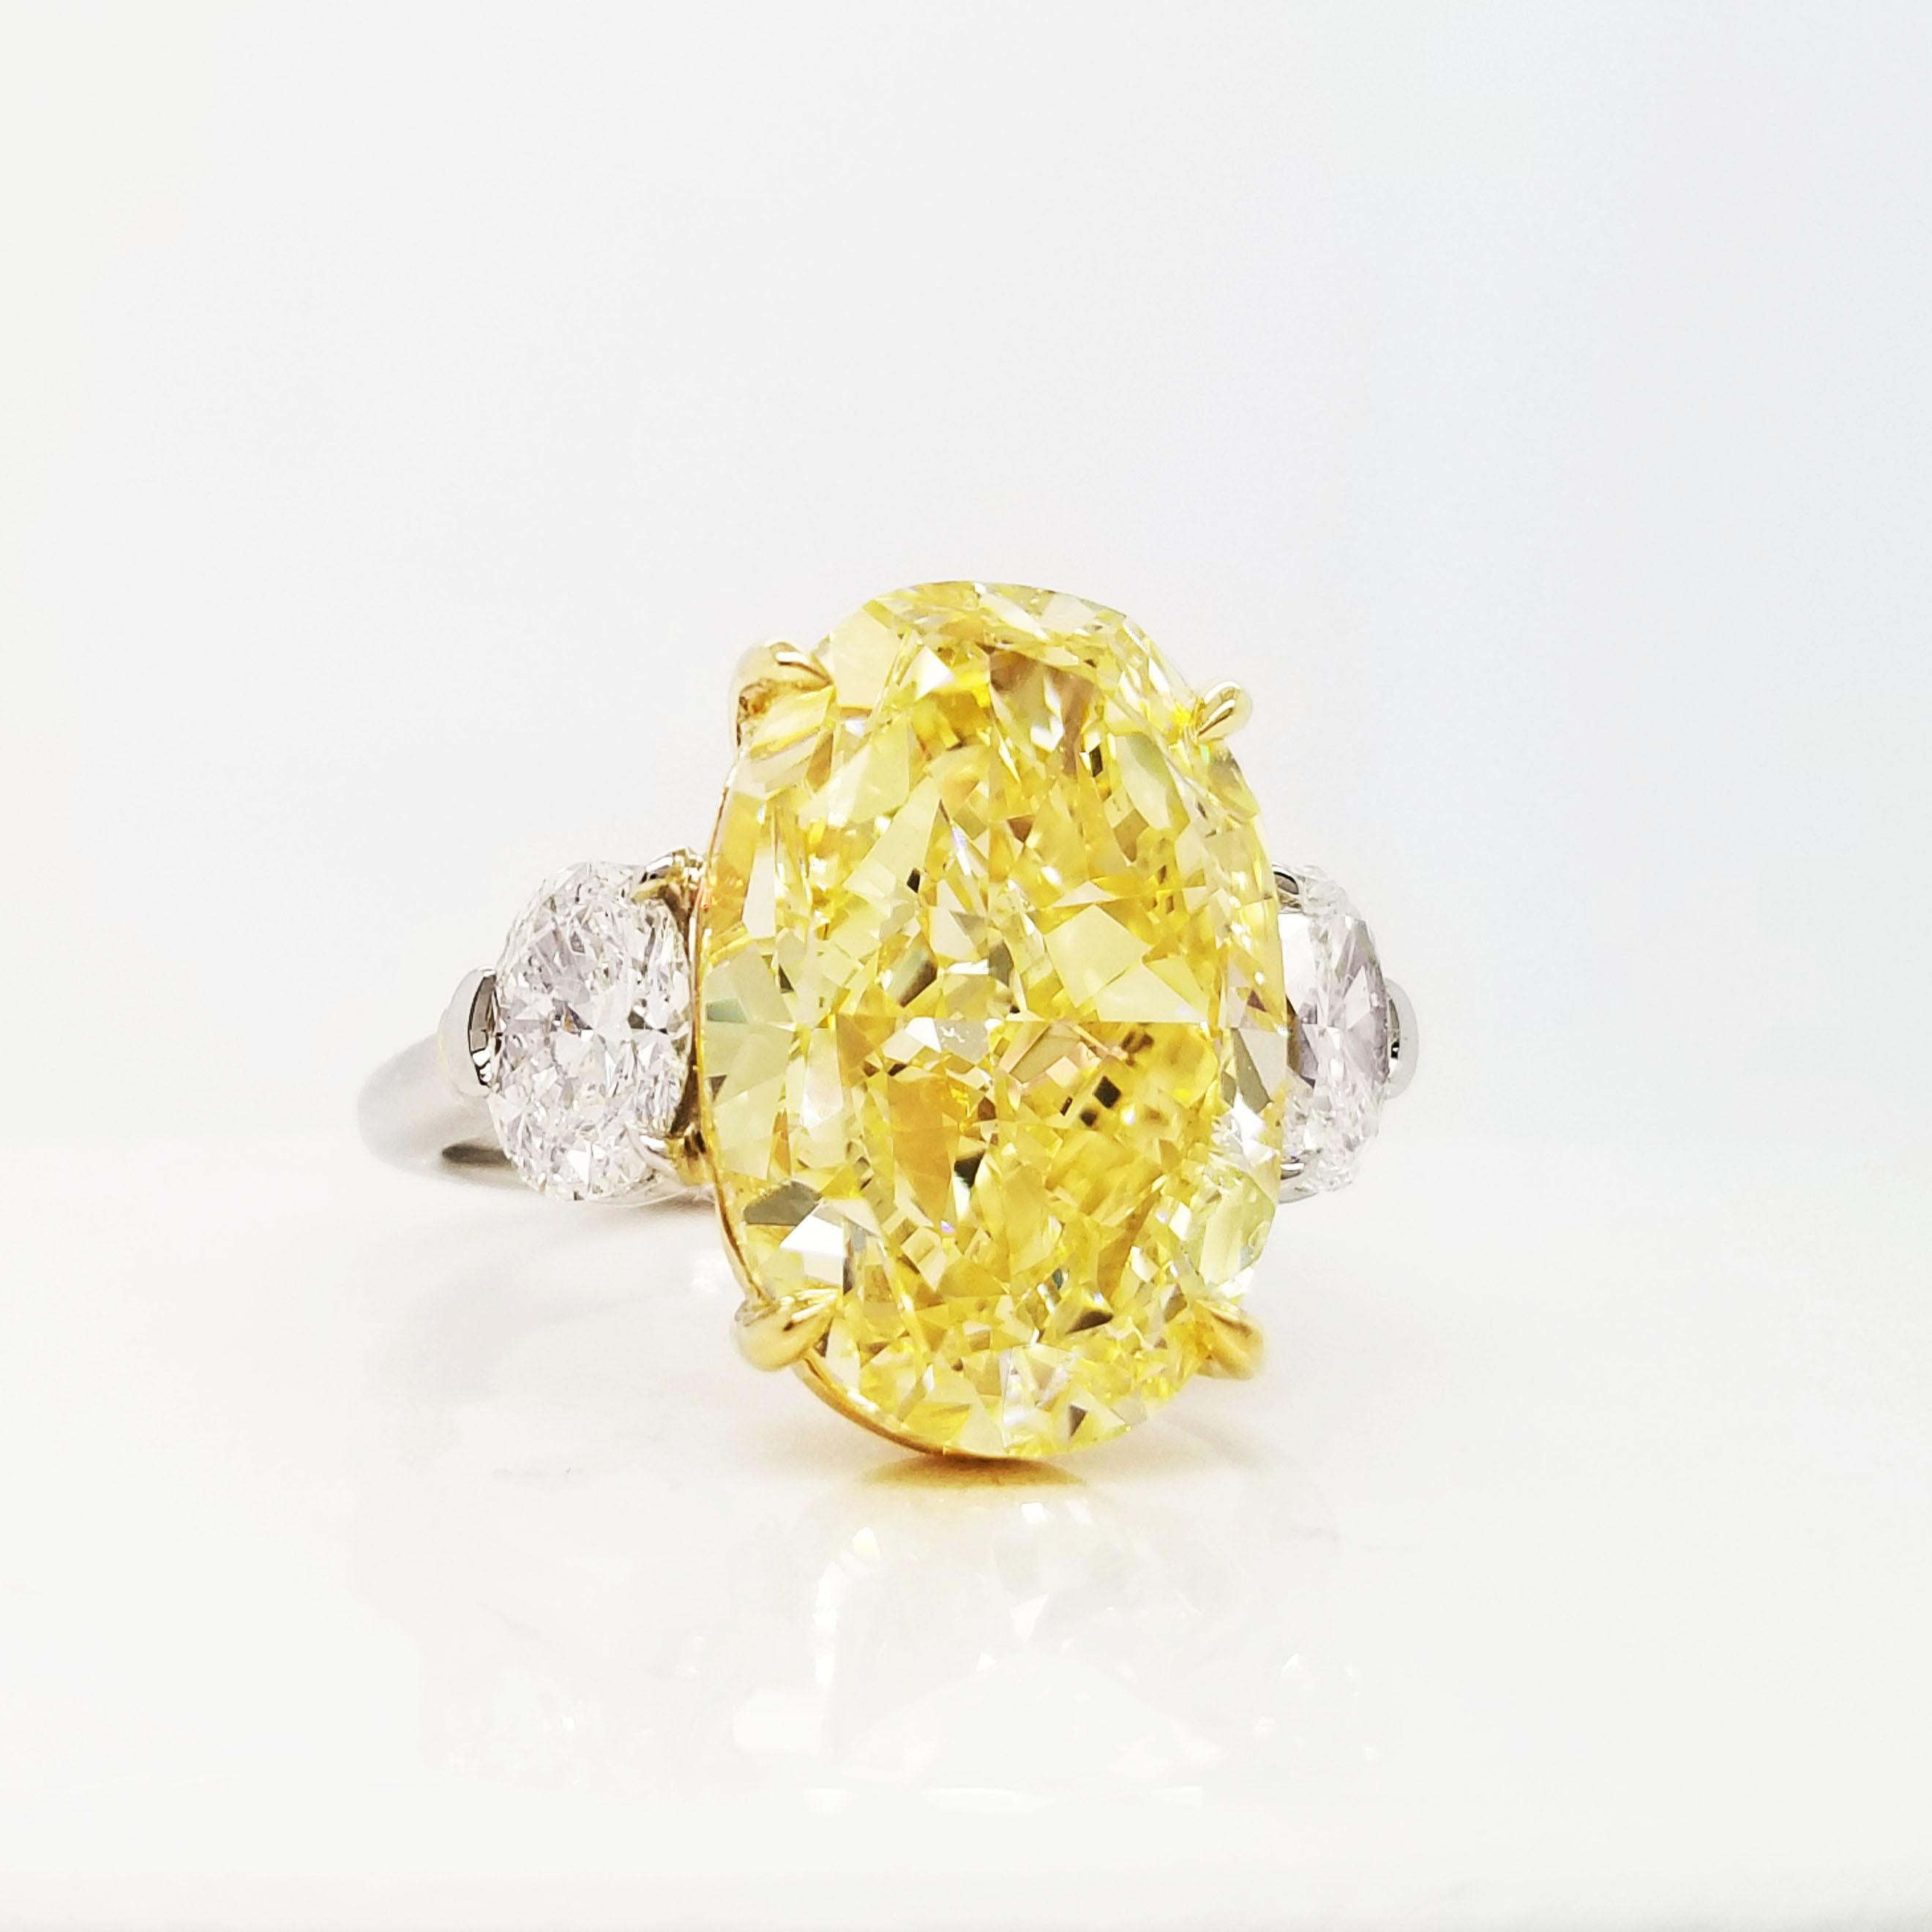 An oval 10 carat natural fancy intense yellow diamond flanked on the sides by two white ovals 0.50 carat each F color VS1 clarity. The three stones are professionally certified by GIA (see certificate pictures for detailed information of the stones)